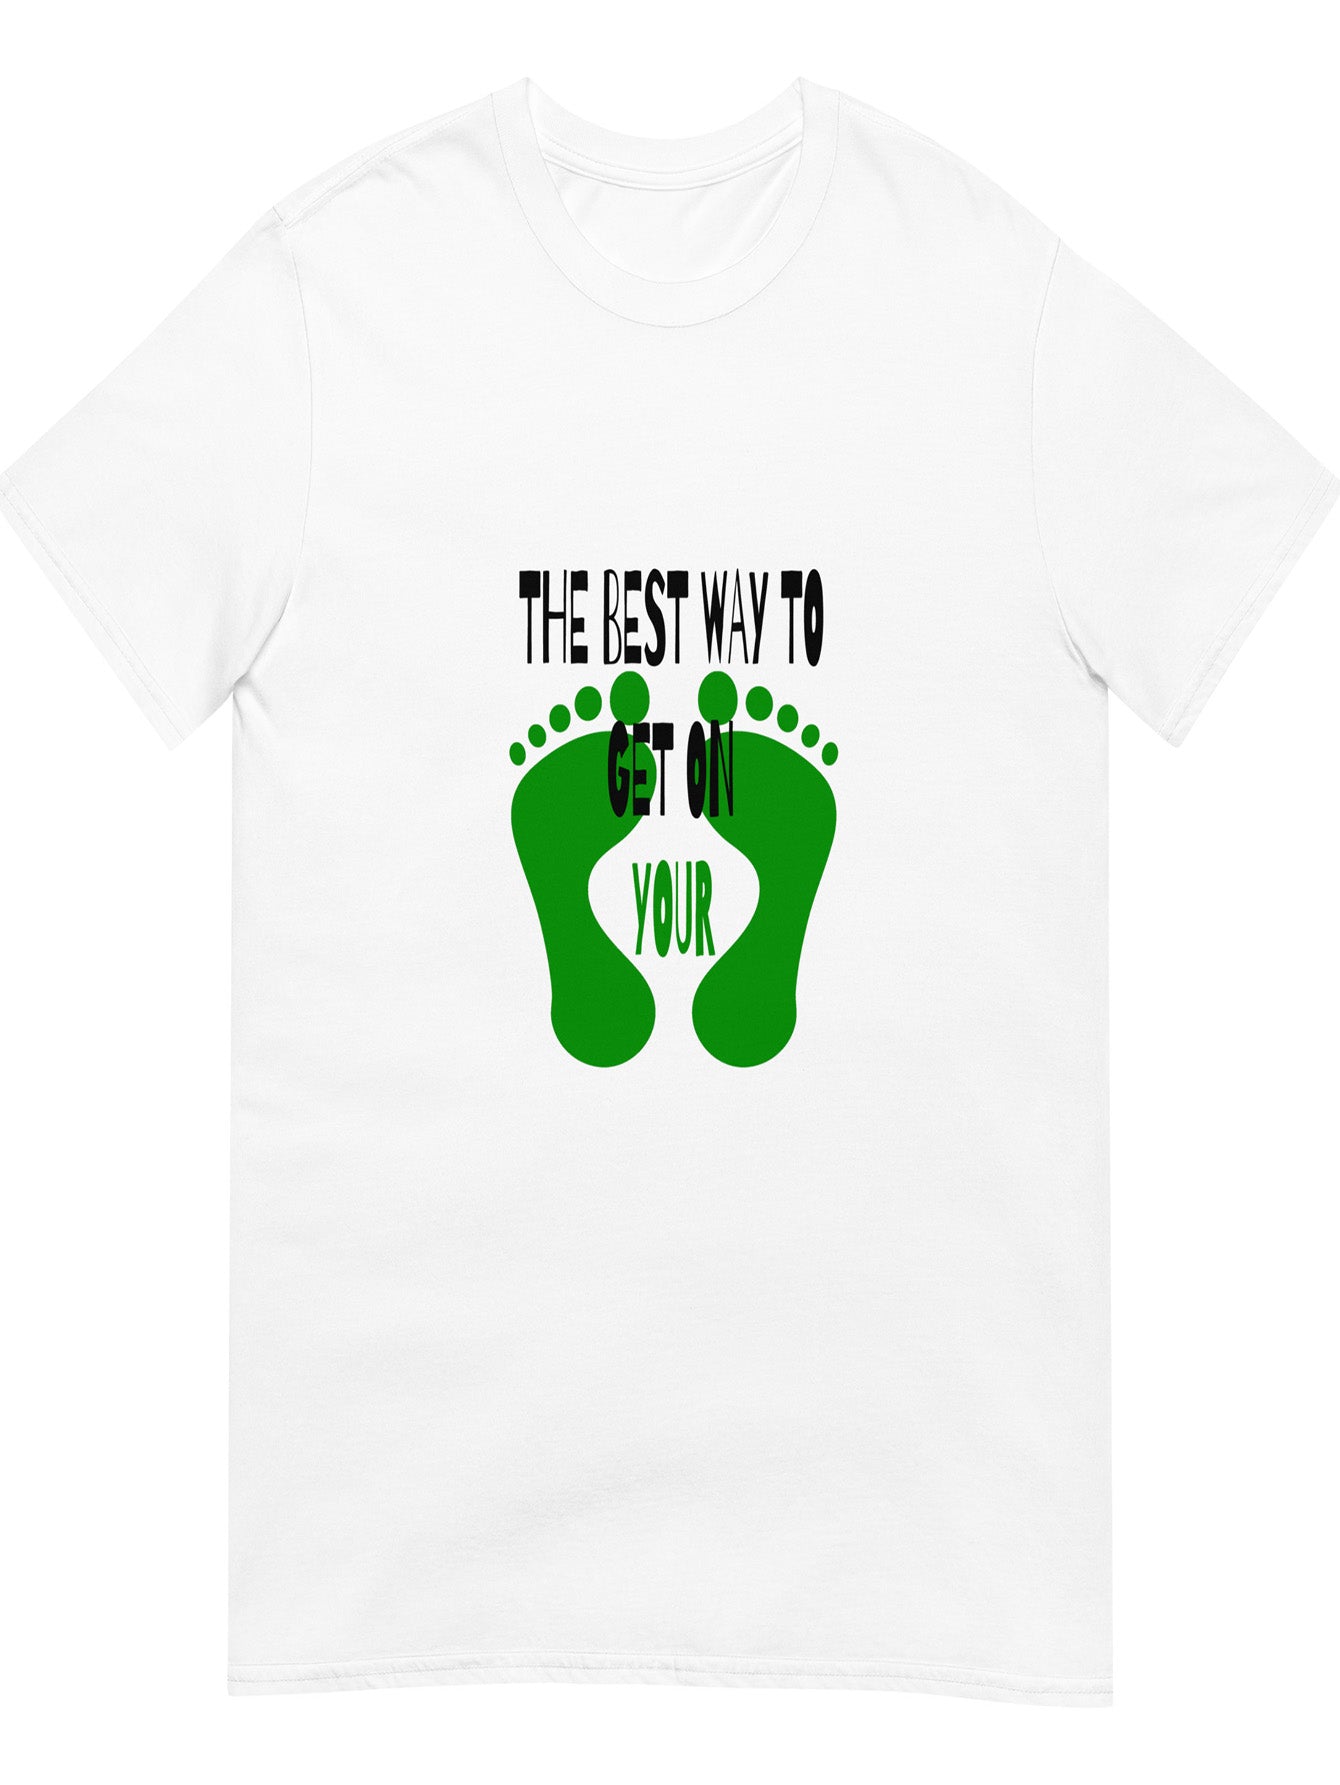 Get On Your Feet....T-Shirt